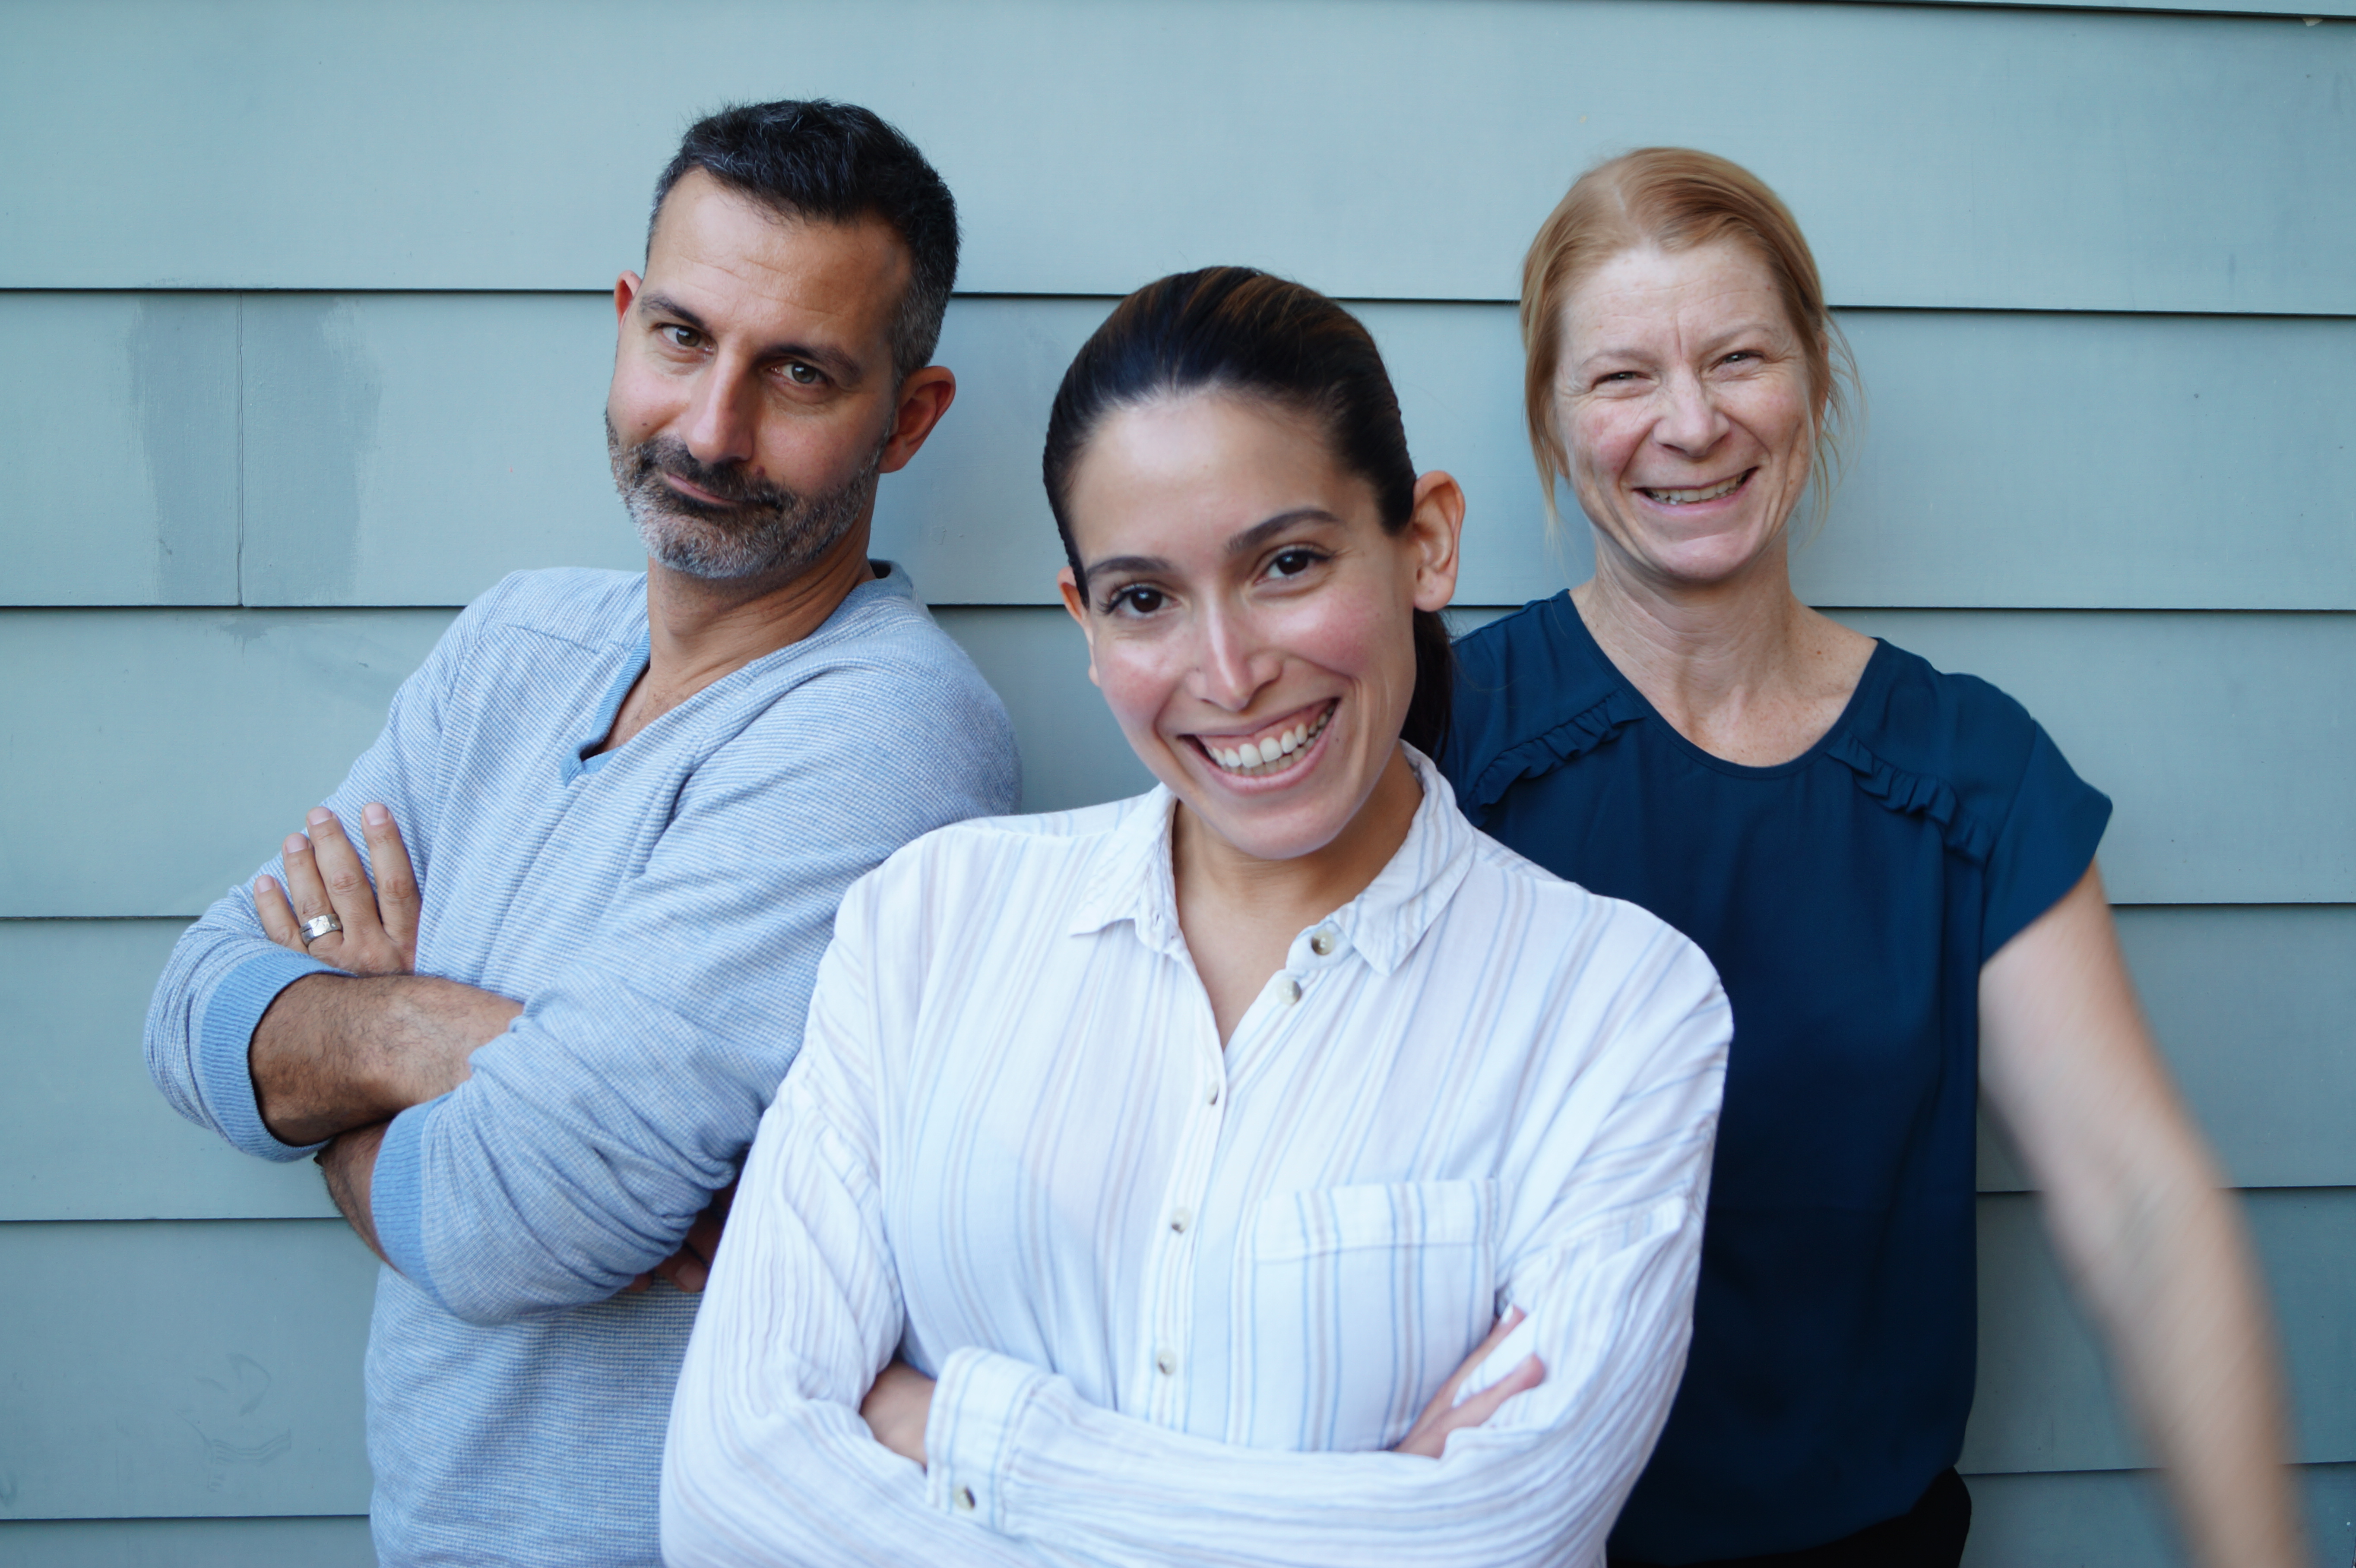 From left, Tracks Public Relations’ Workplace Strategies Director Karim Bouris; Angela Rivera, director of people + creative for Tracks; Jamie Hampton, founder and CEO of Tracks.